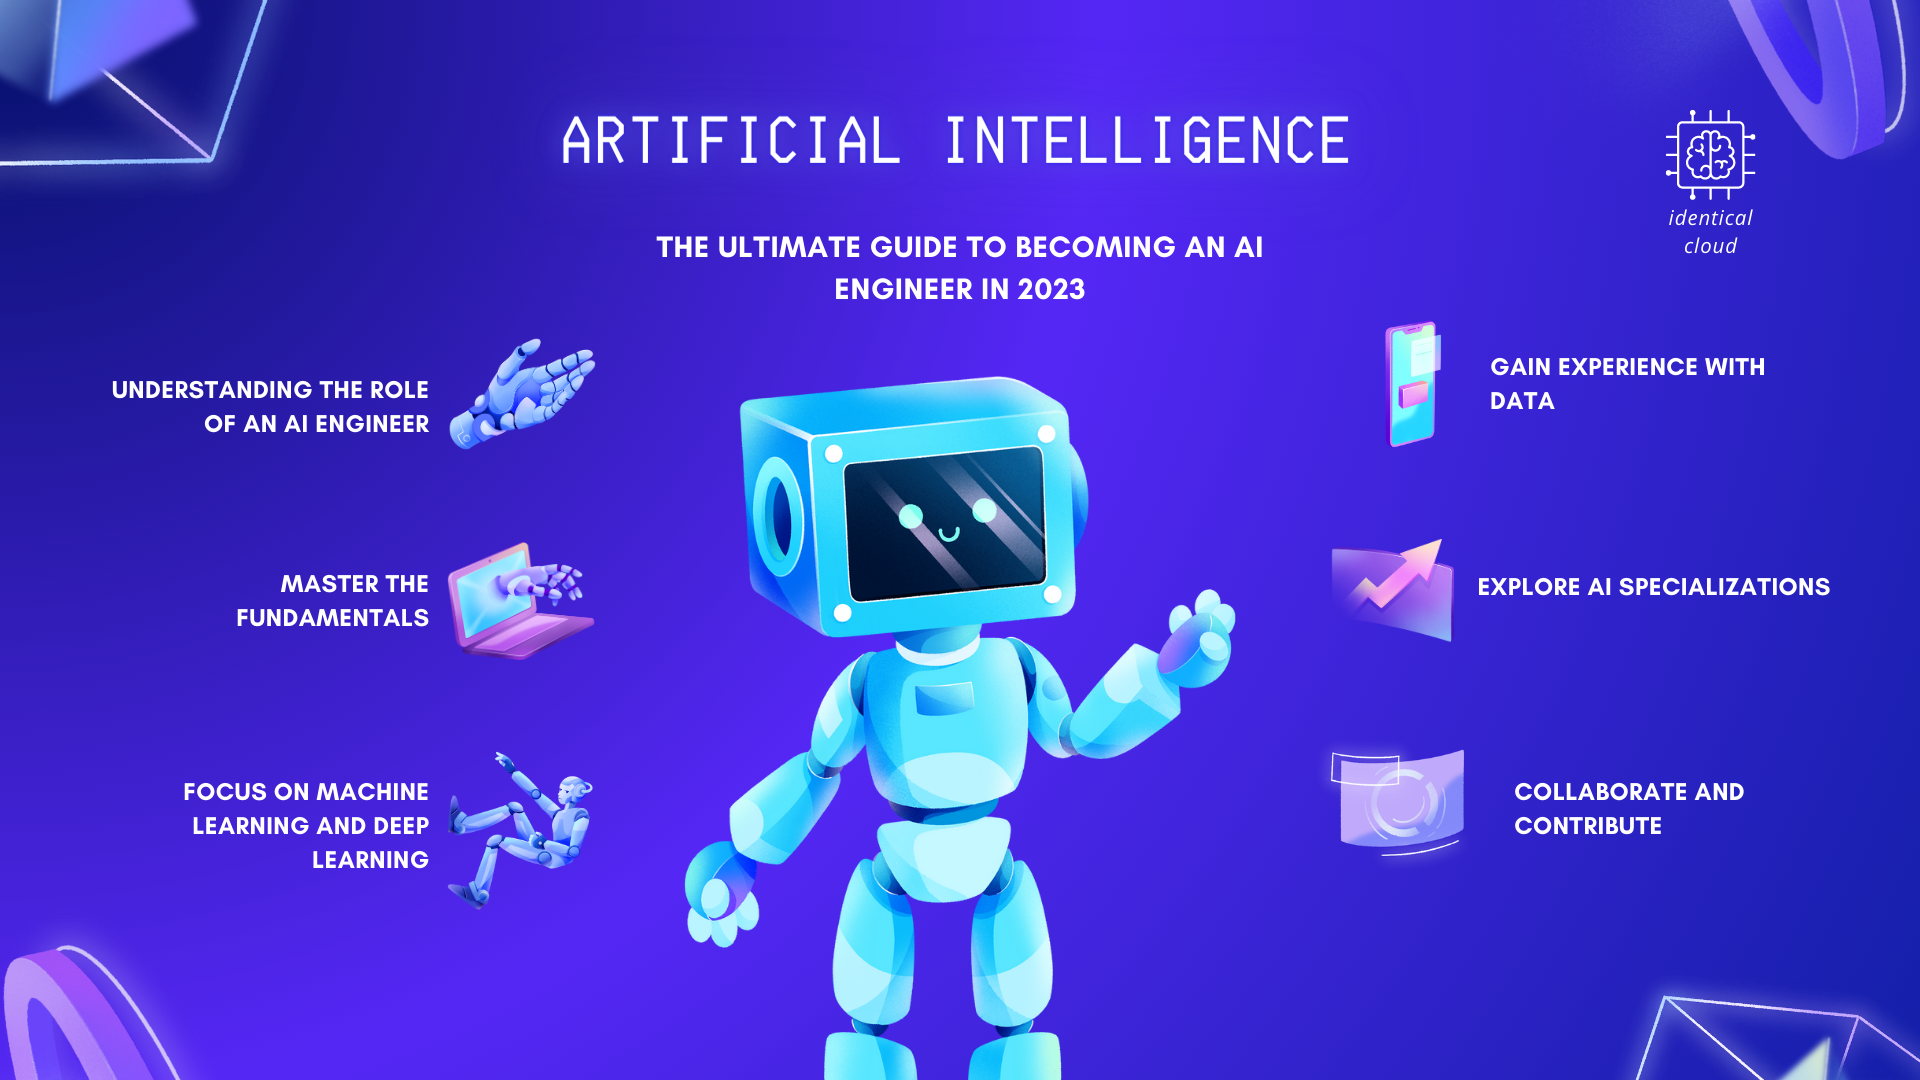 The Ultimate Guide to Becoming an AI Engineer in 2023